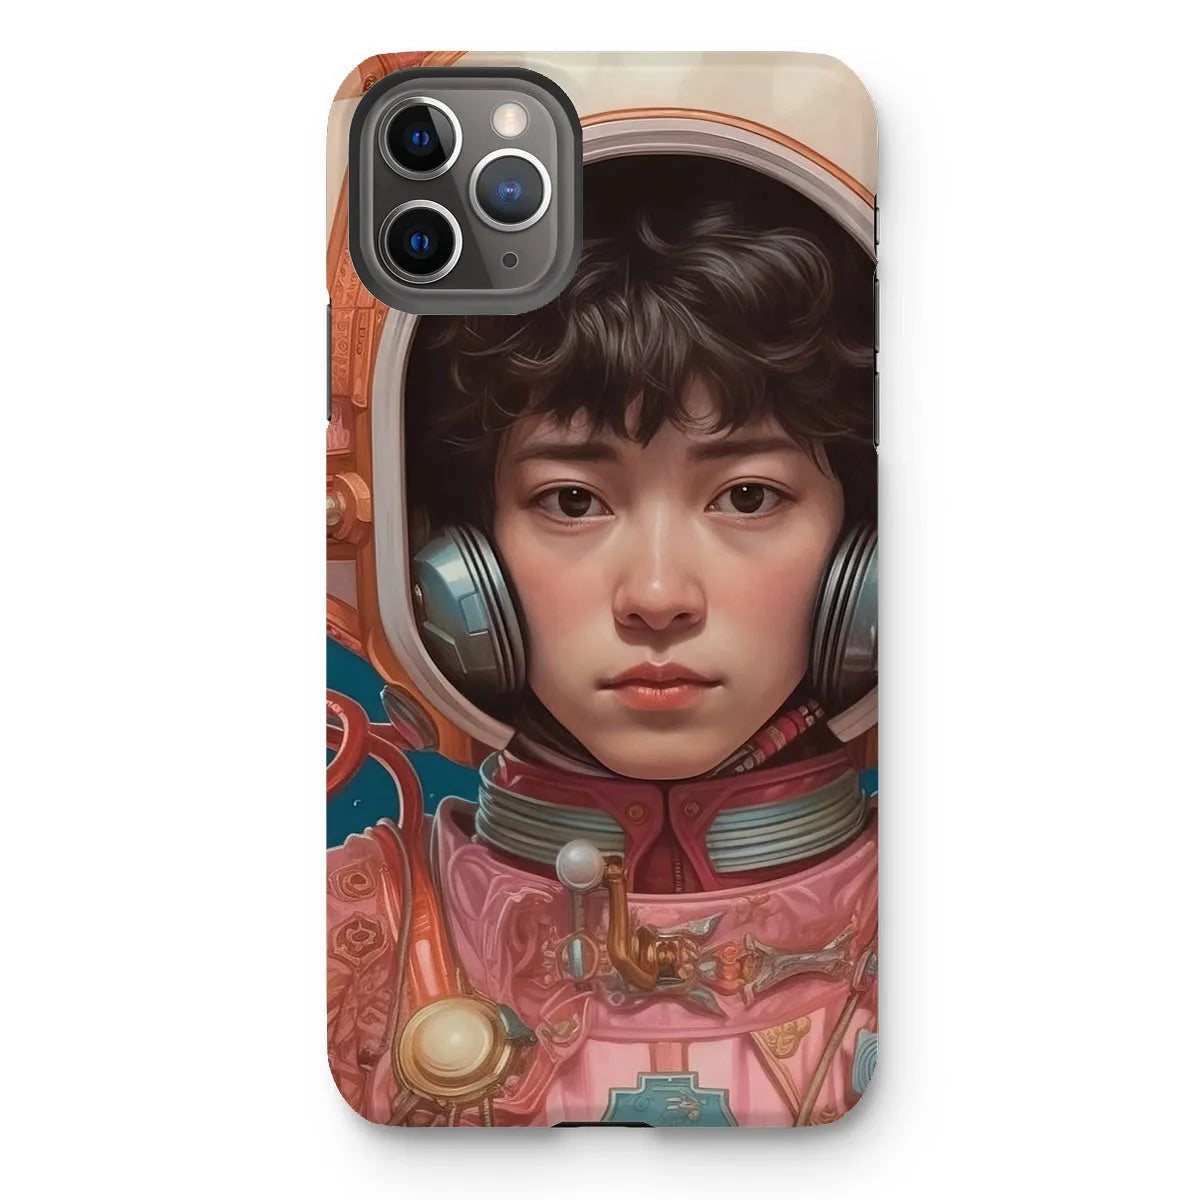 Kaito The Gay Astronaut - Lgbtq Art Phone Case - Iphone 11 Pro Max / Matte - Mobile Phone Cases - Aesthetic Art